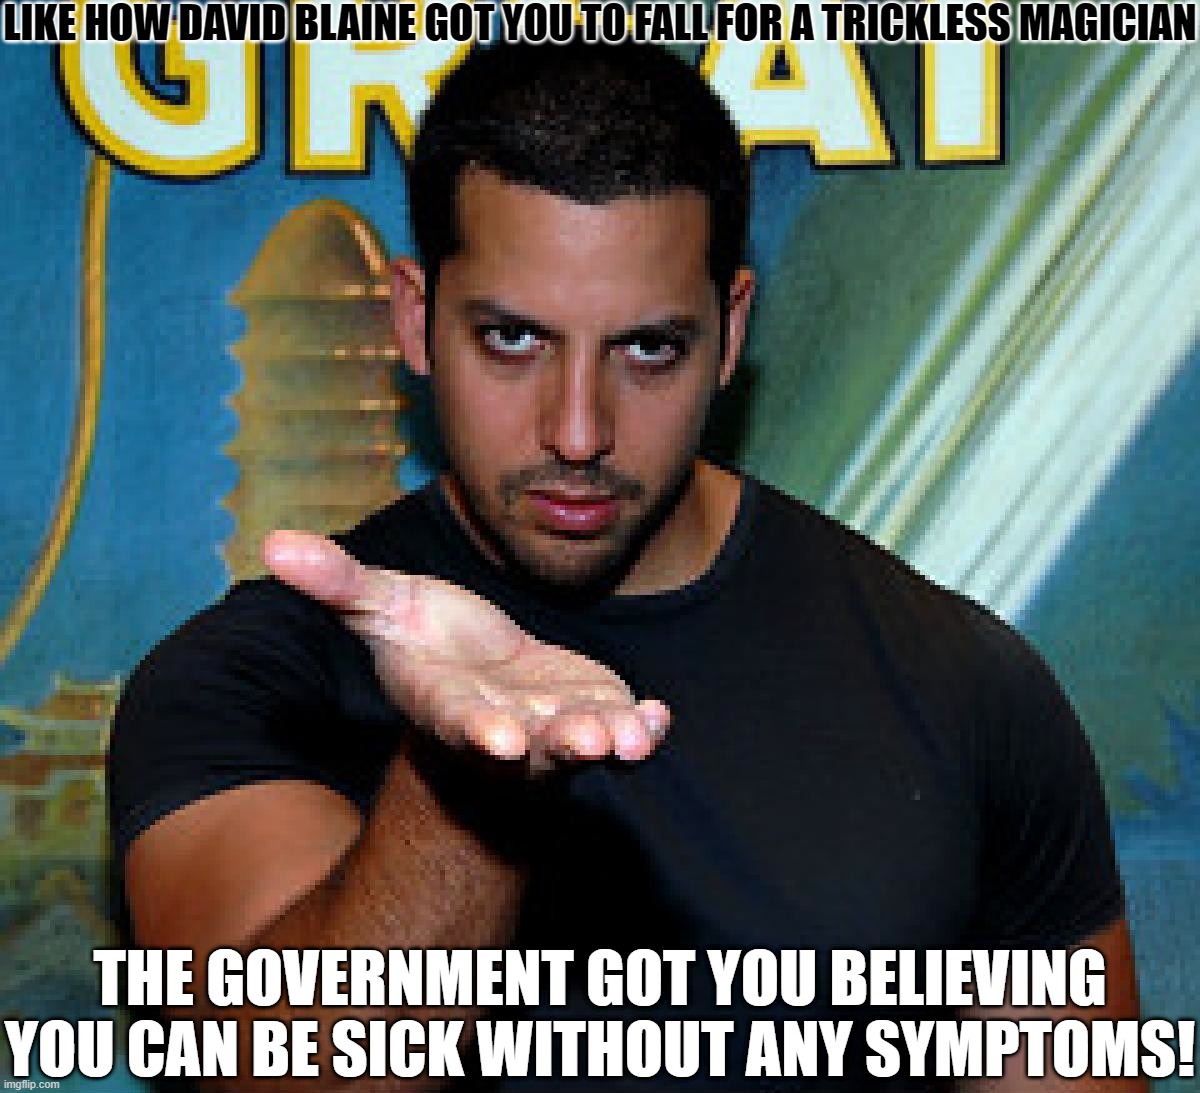 Covid Truth | LIKE HOW DAVID BLAINE GOT YOU TO FALL FOR A TRICKLESS MAGICIAN; THE GOVERNMENT GOT YOU BELIEVING YOU CAN BE SICK WITHOUT ANY SYMPTOMS! | image tagged in david blaine,no symptoms,govern me harder daddy | made w/ Imgflip meme maker